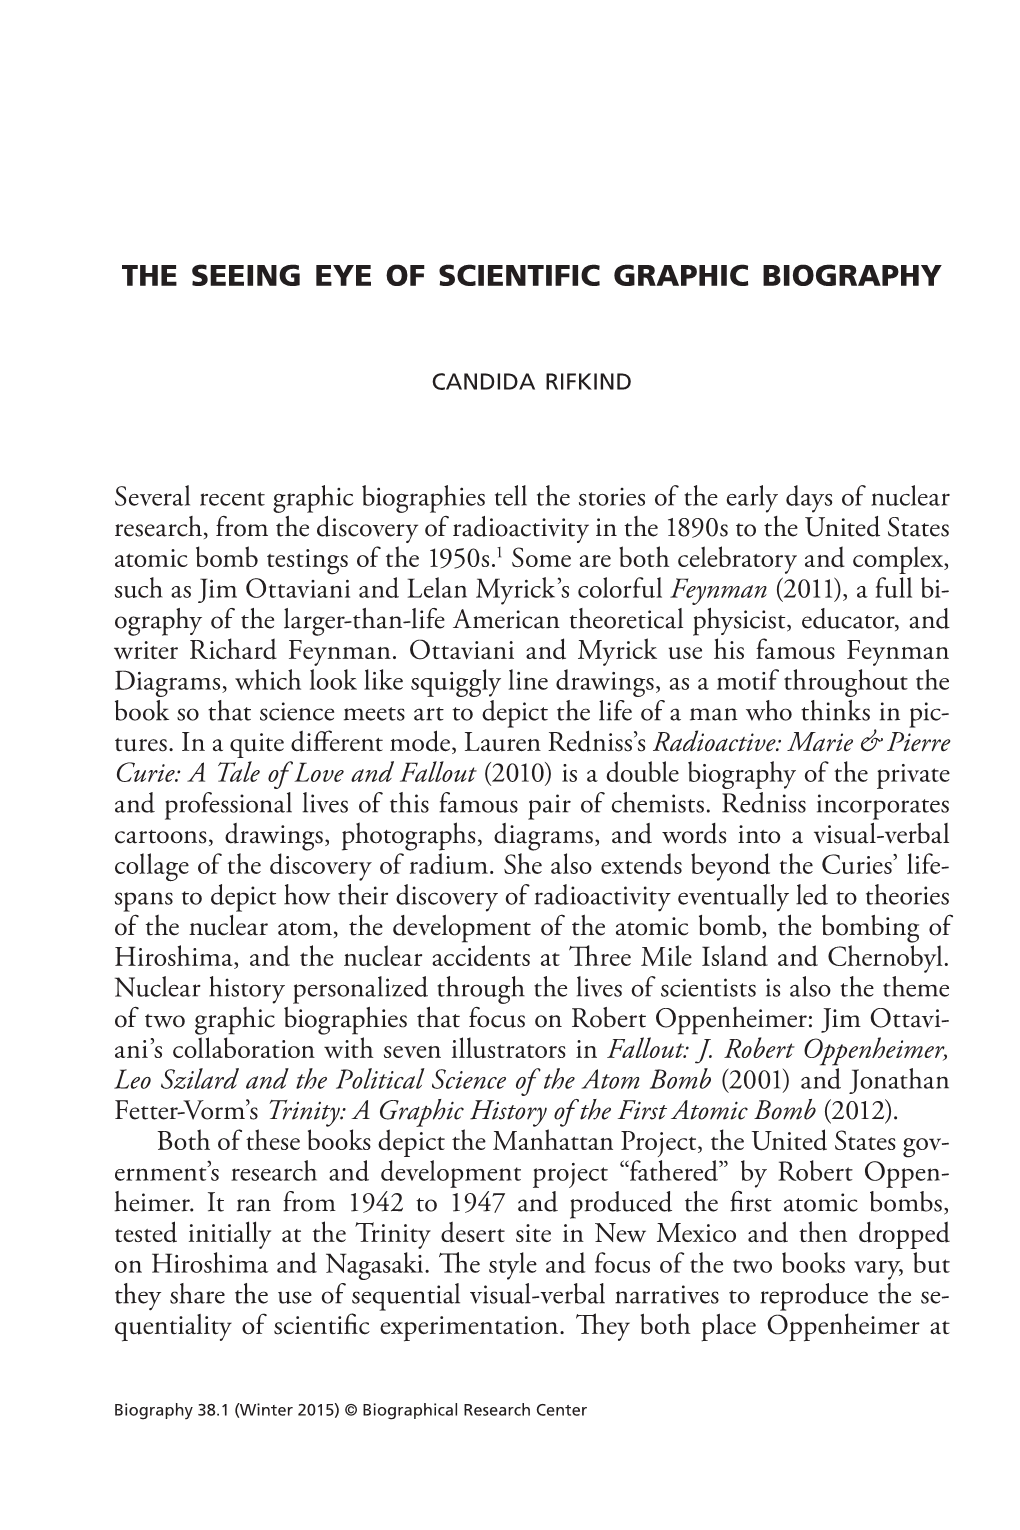 The Seeing Eye of Scientific Graphic Biography